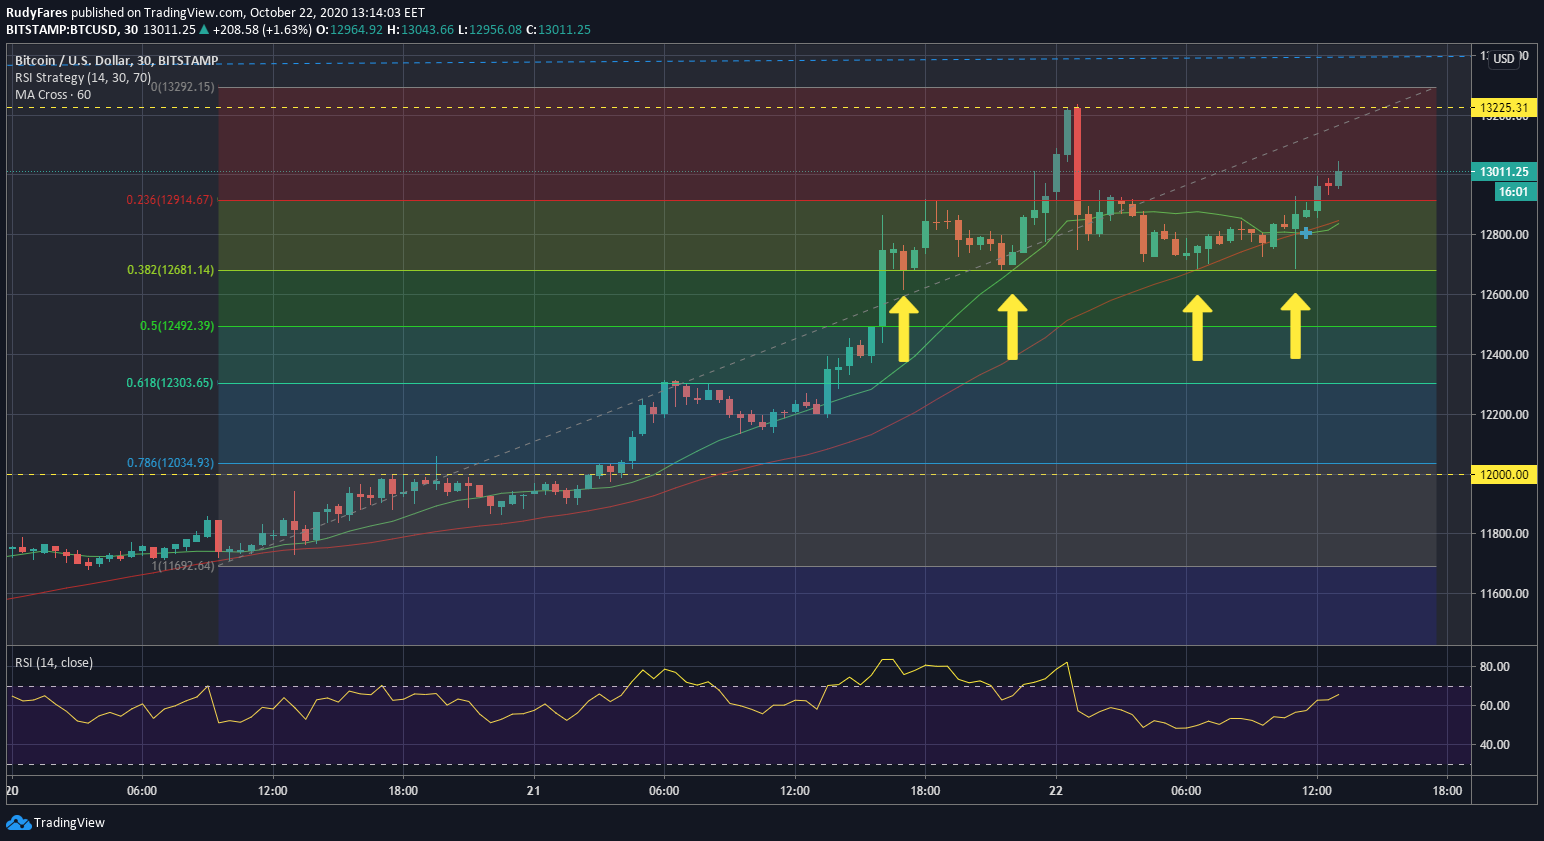 Trading View 30-minutes chart showing the support levels of Bitcoin for day traders